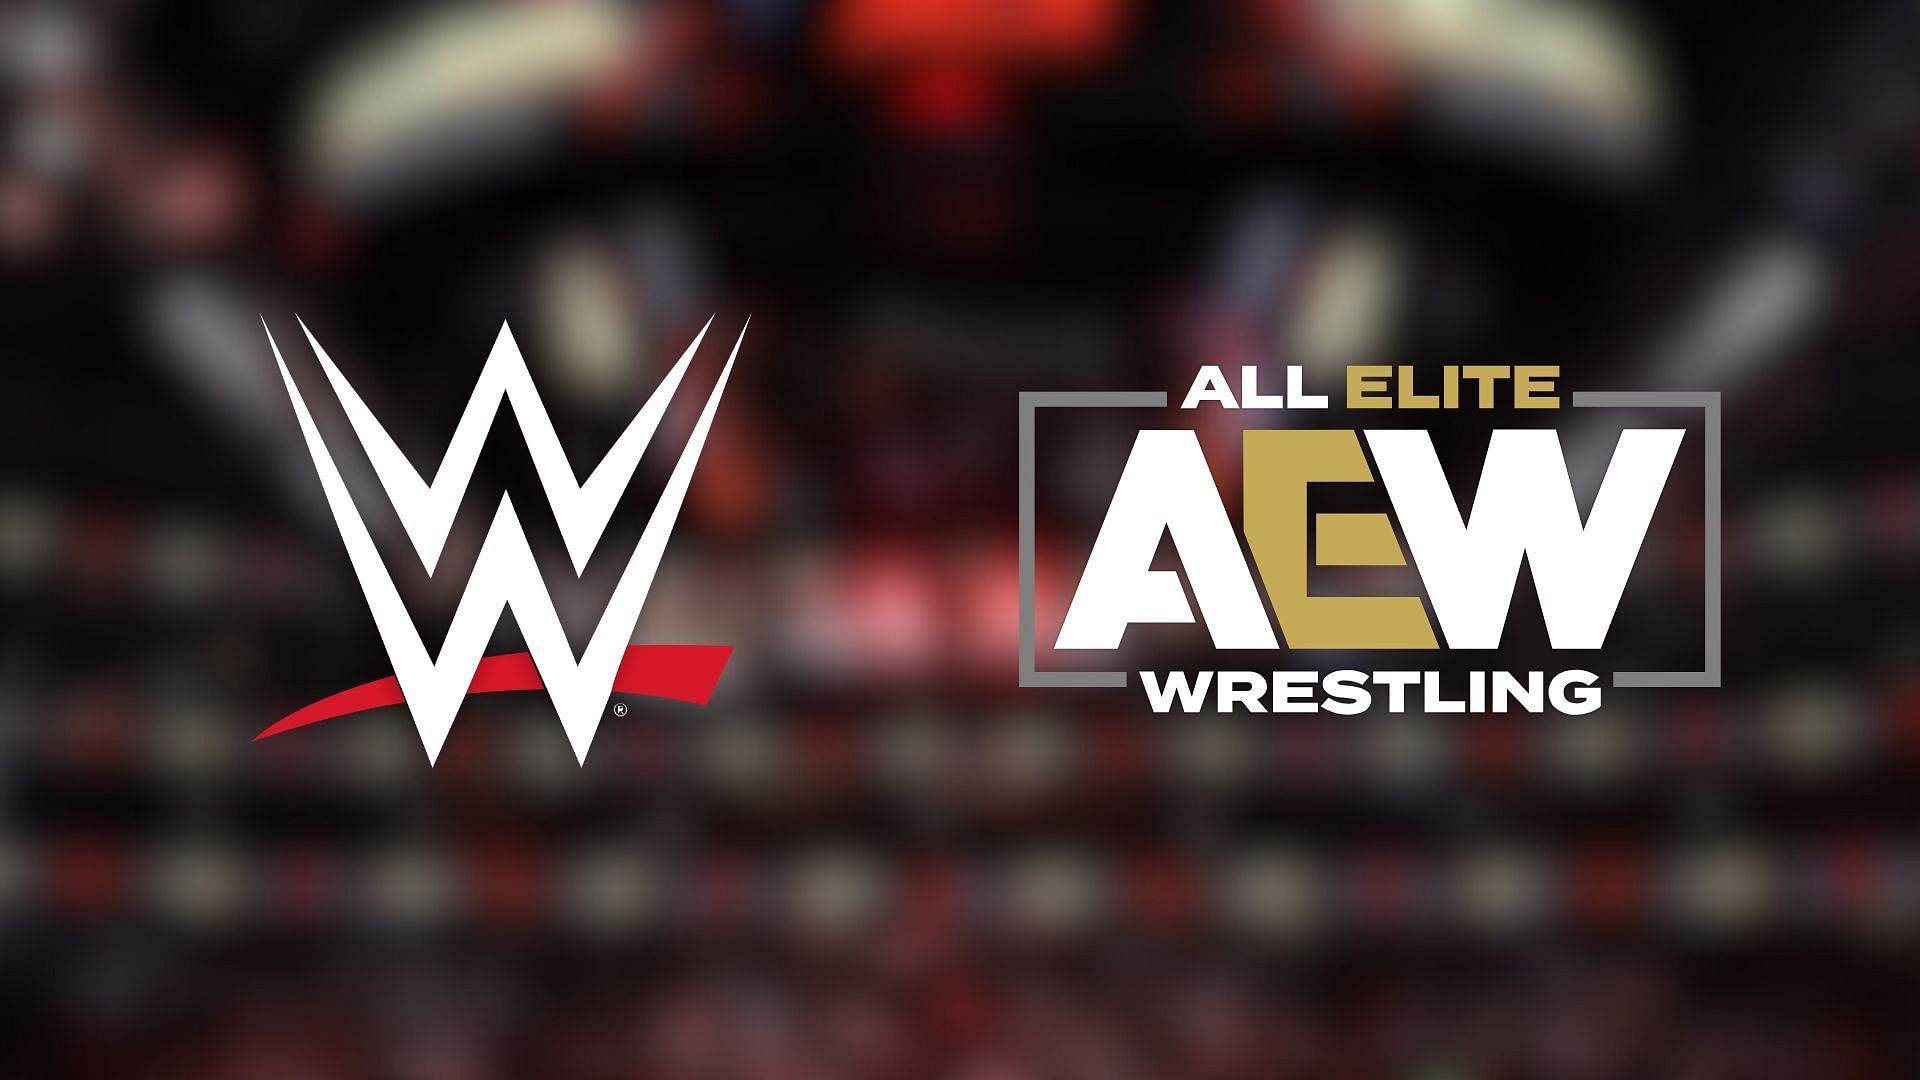 What does a current AEW champion regret about their cameo in WWE?